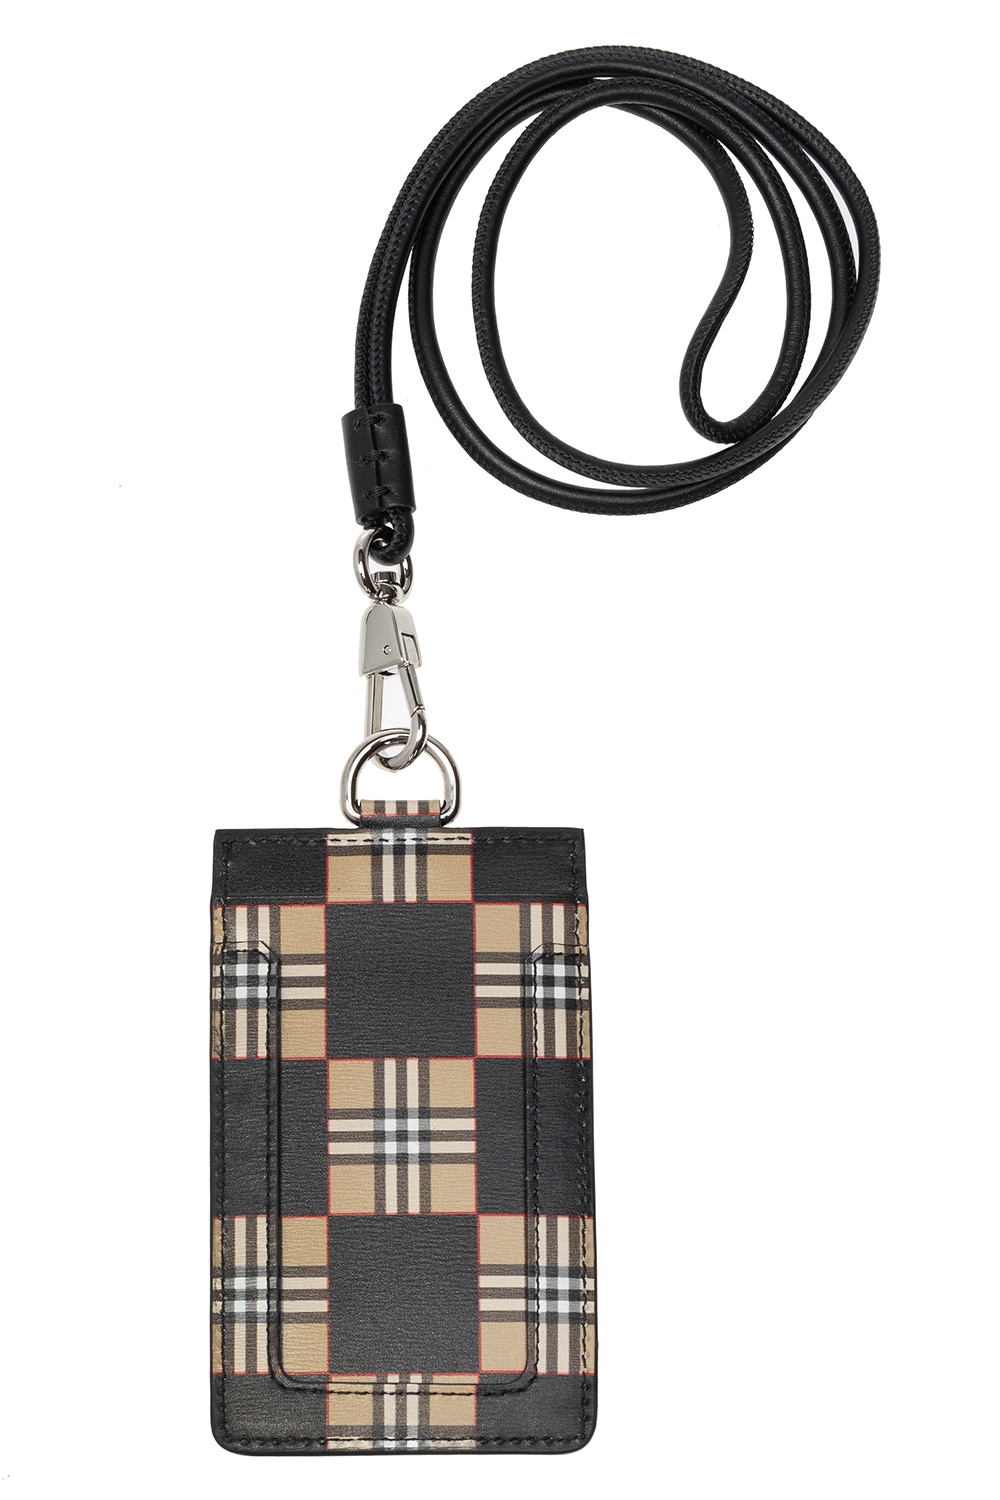 Burberry Card case on strap, Men's Accessories